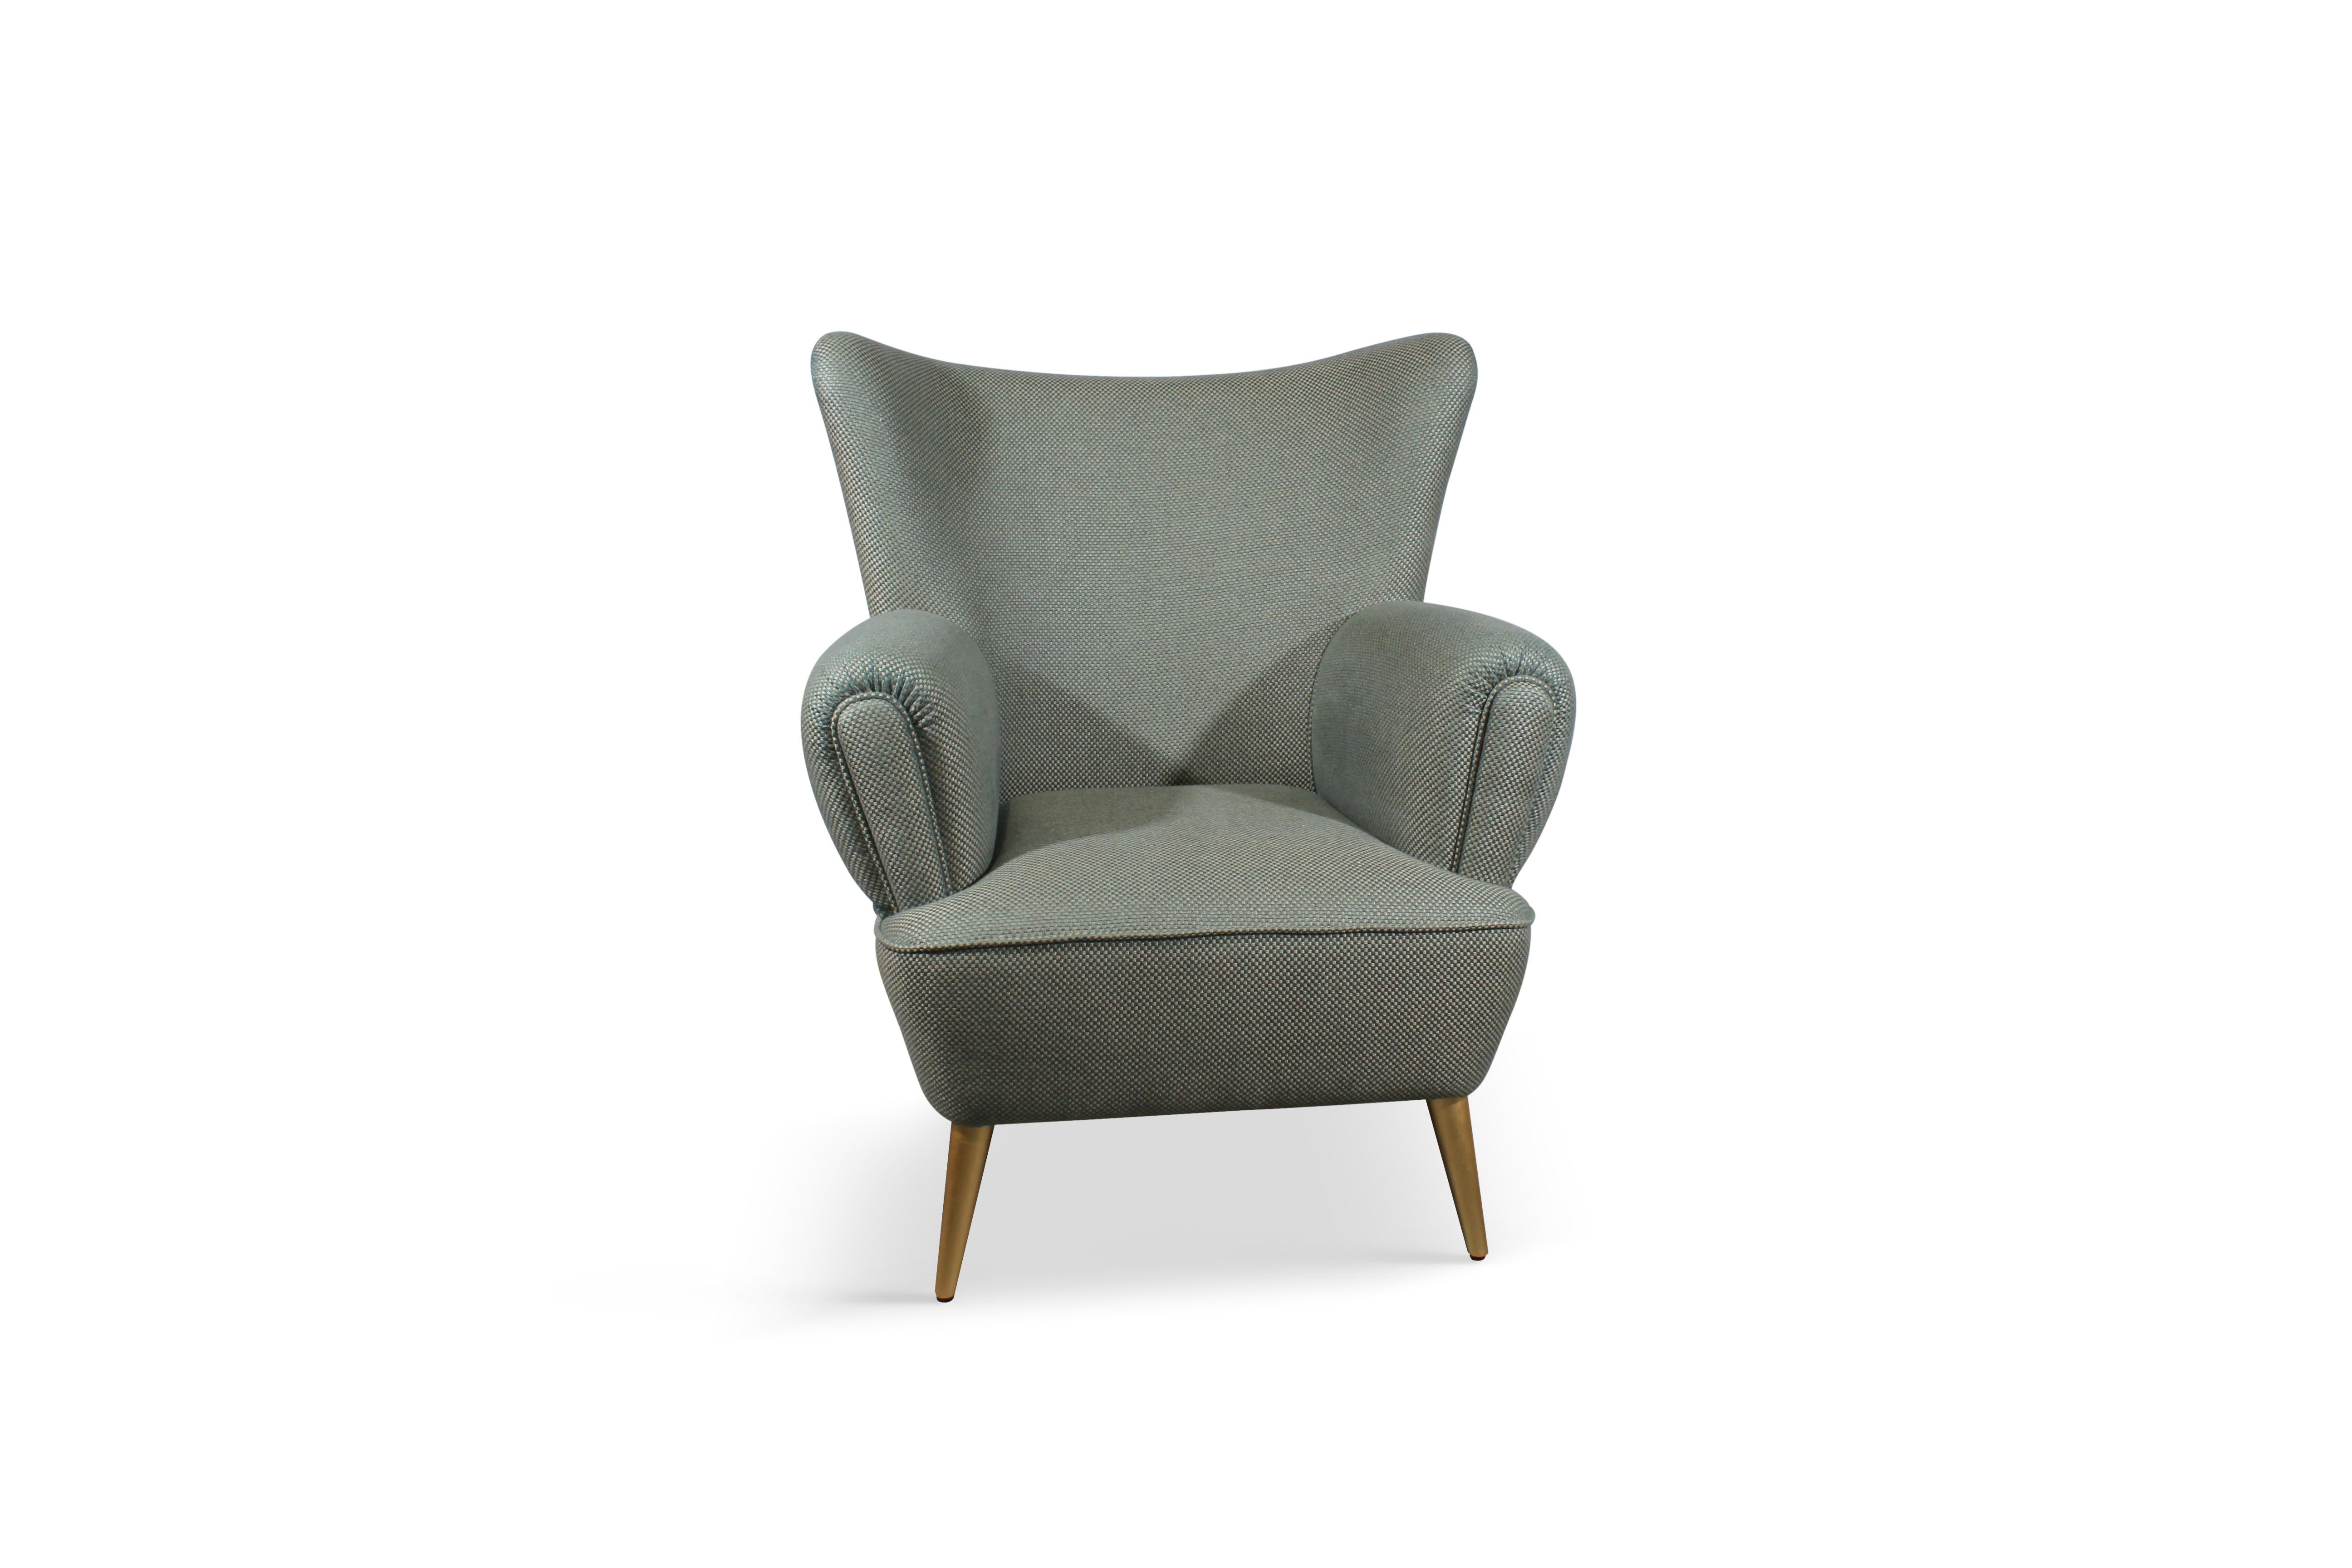 With a signature smile, an always perfect hair and makeup epitomizing the golden age of old Hollywood glamour, the head-turning Judy Garland was one of the 1950s cinematic royalties. The Garland Luxurious armchair is a midcentury piece inspired by